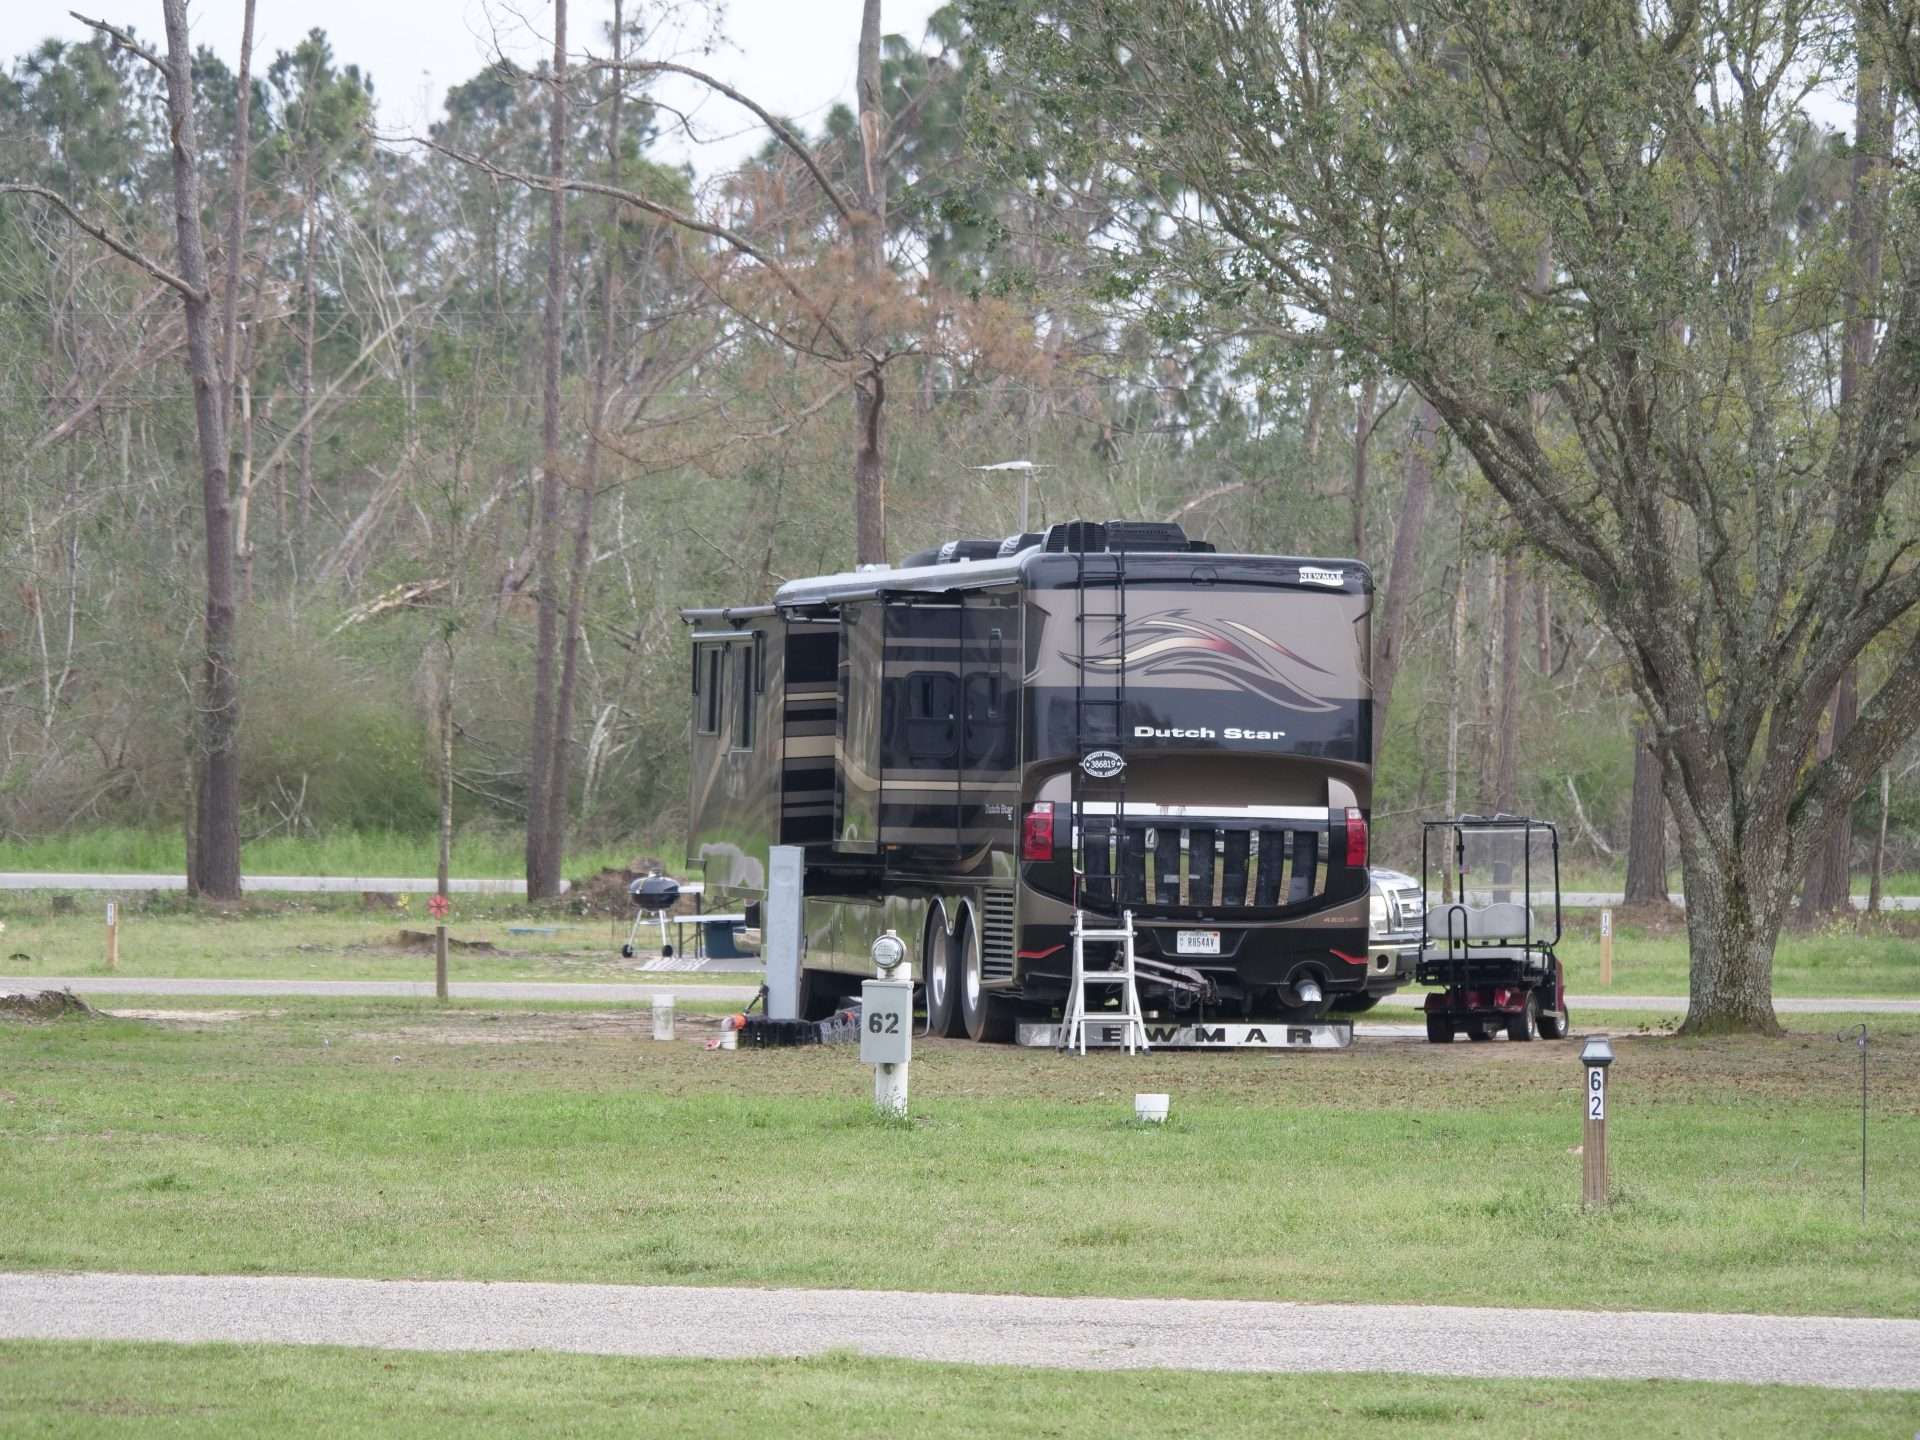 Dutch Star Newmar RV parked at campsite.